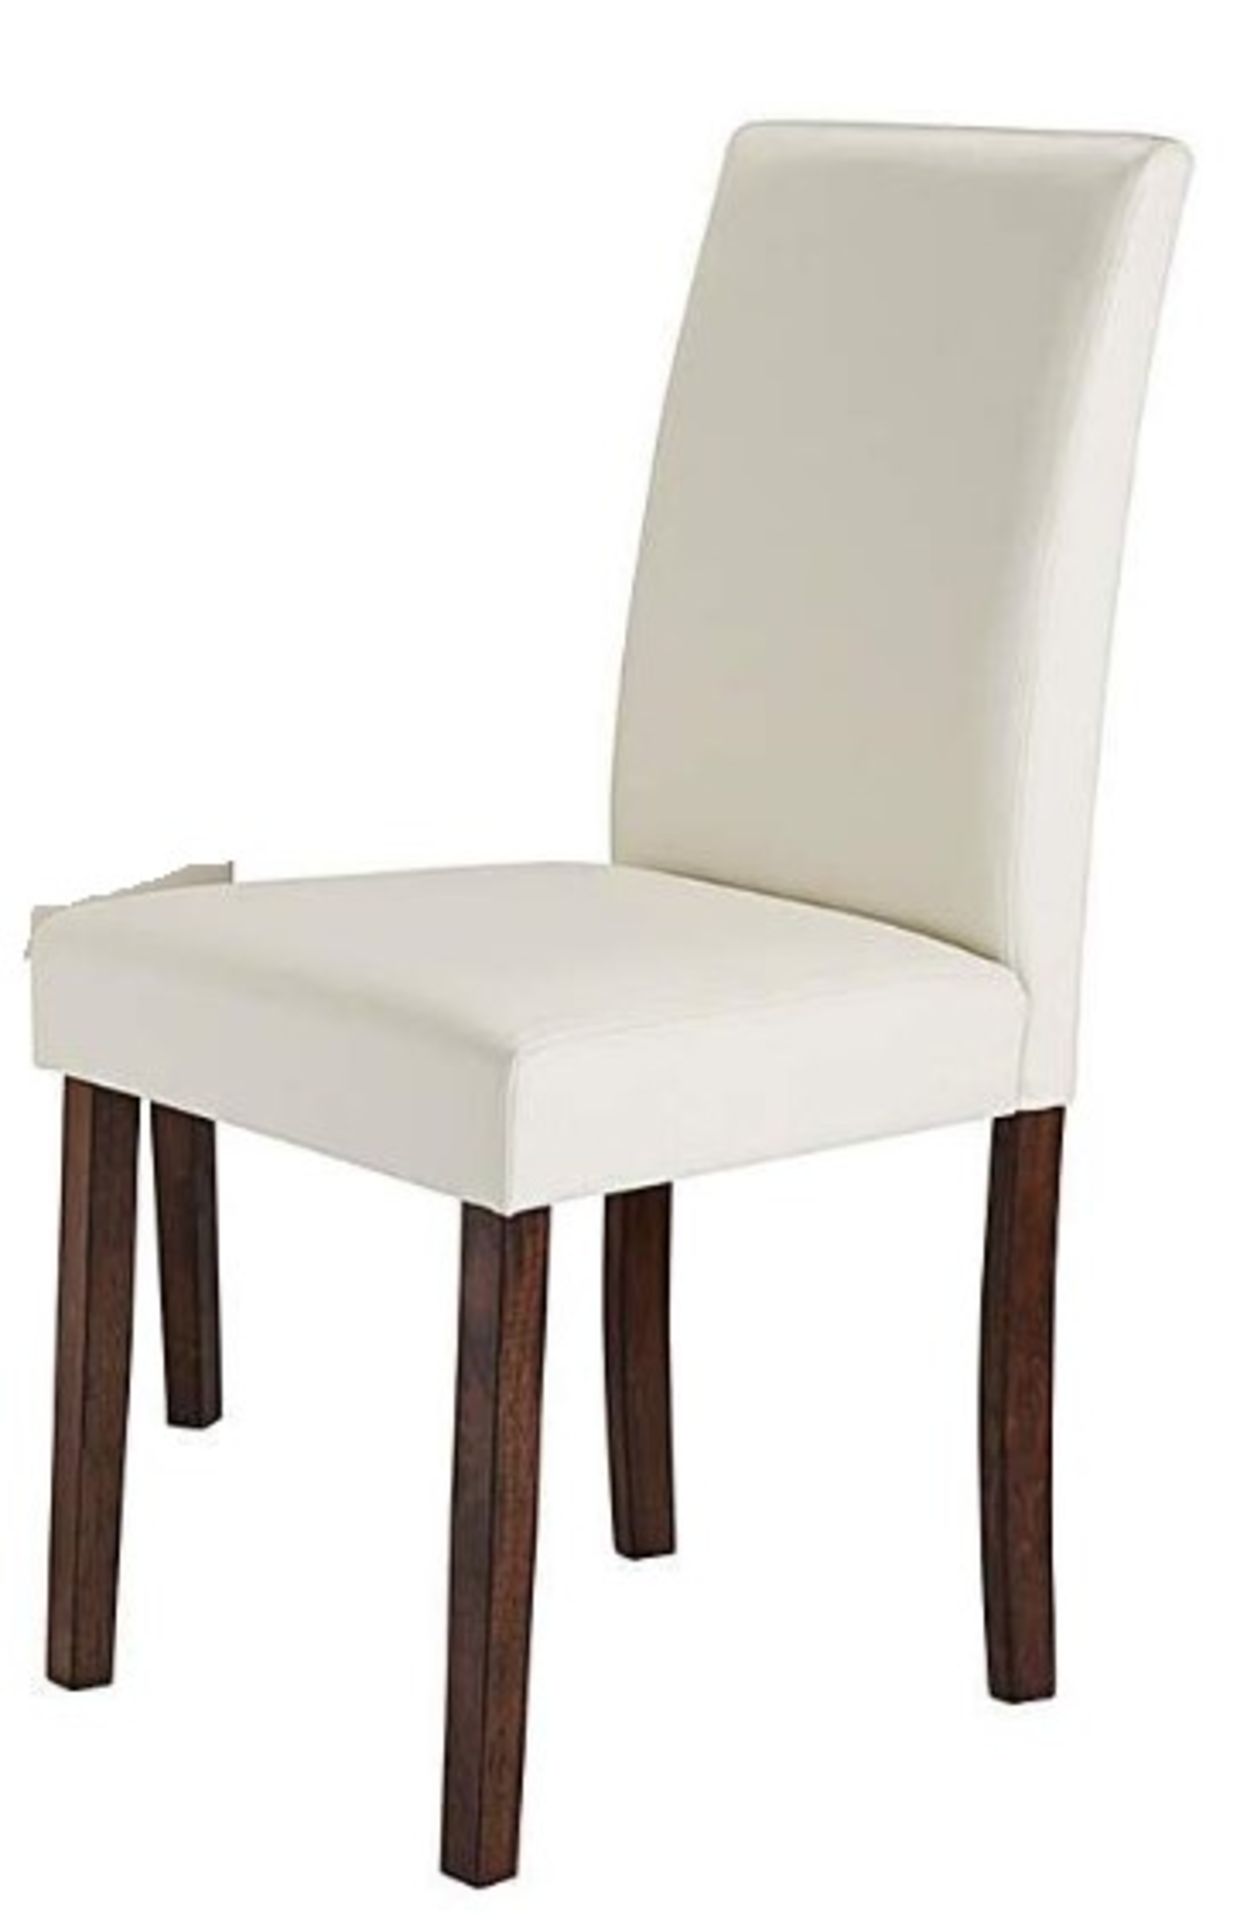 (186/5B) 3x Chair Items. 1x Mia Faux Leather Dining Chair Cream RRP £54.50 (QF845). 2x Mixed St